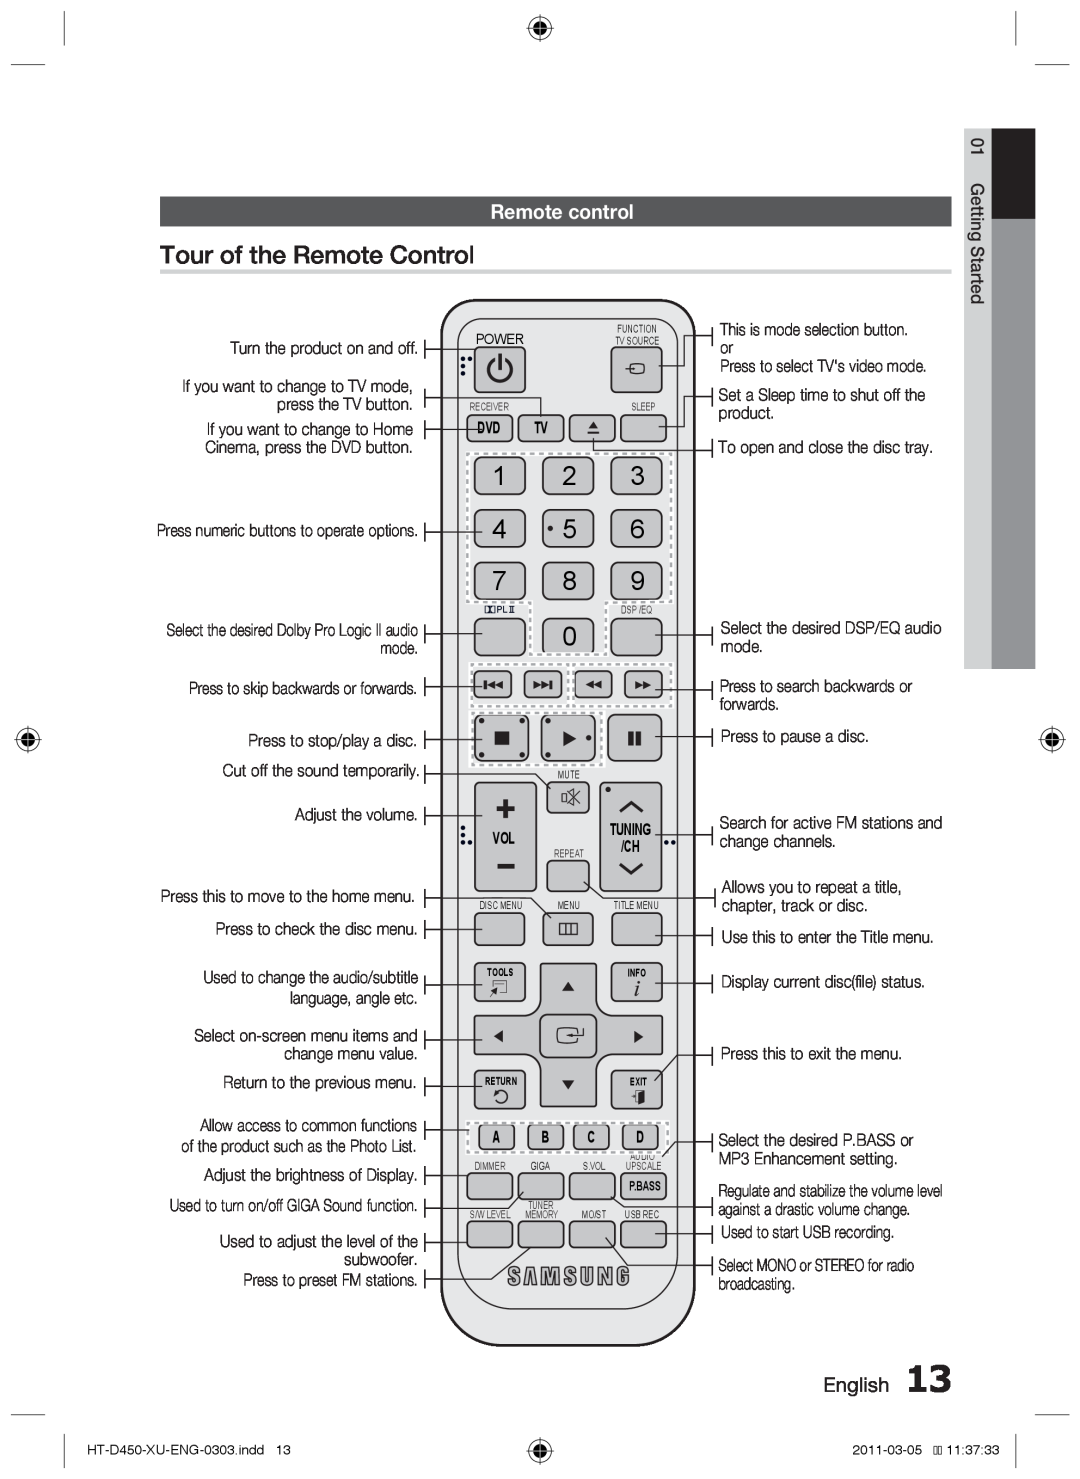 Samsung HT-D455, HT-D450, HT-D453 user manual English, Press numeric buttons to operate options 